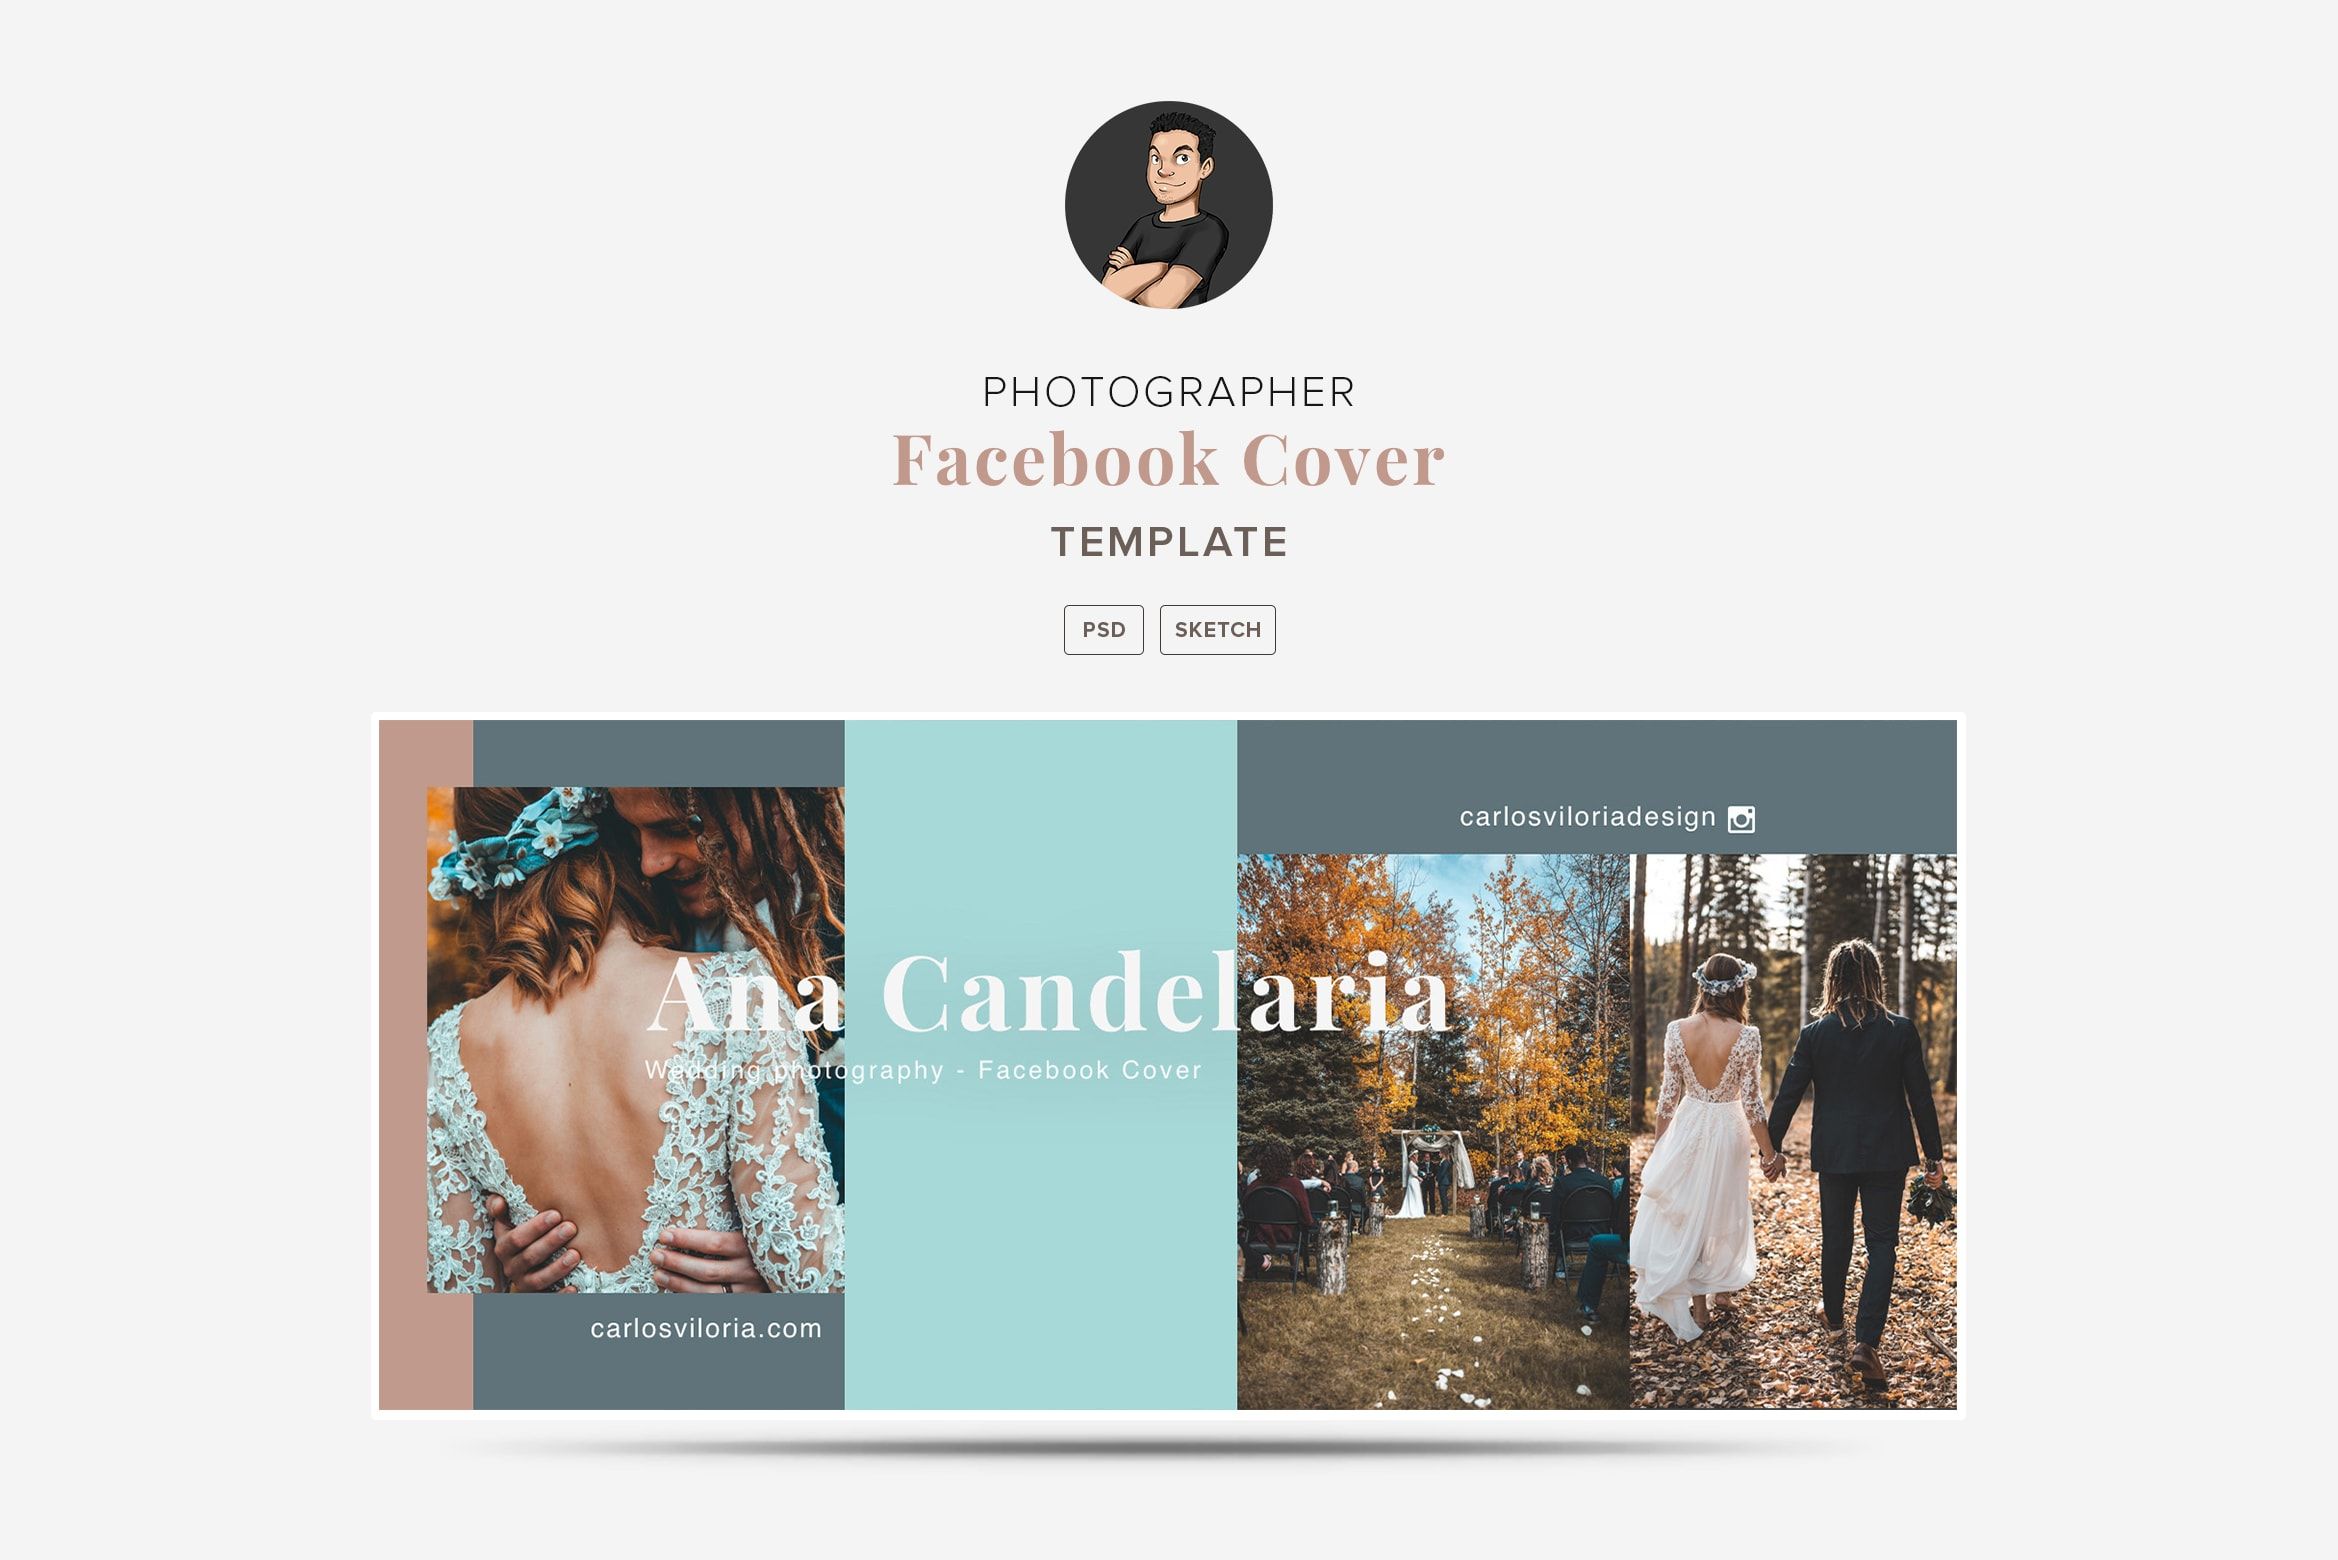 Facebook Cover Template 02 for Photography